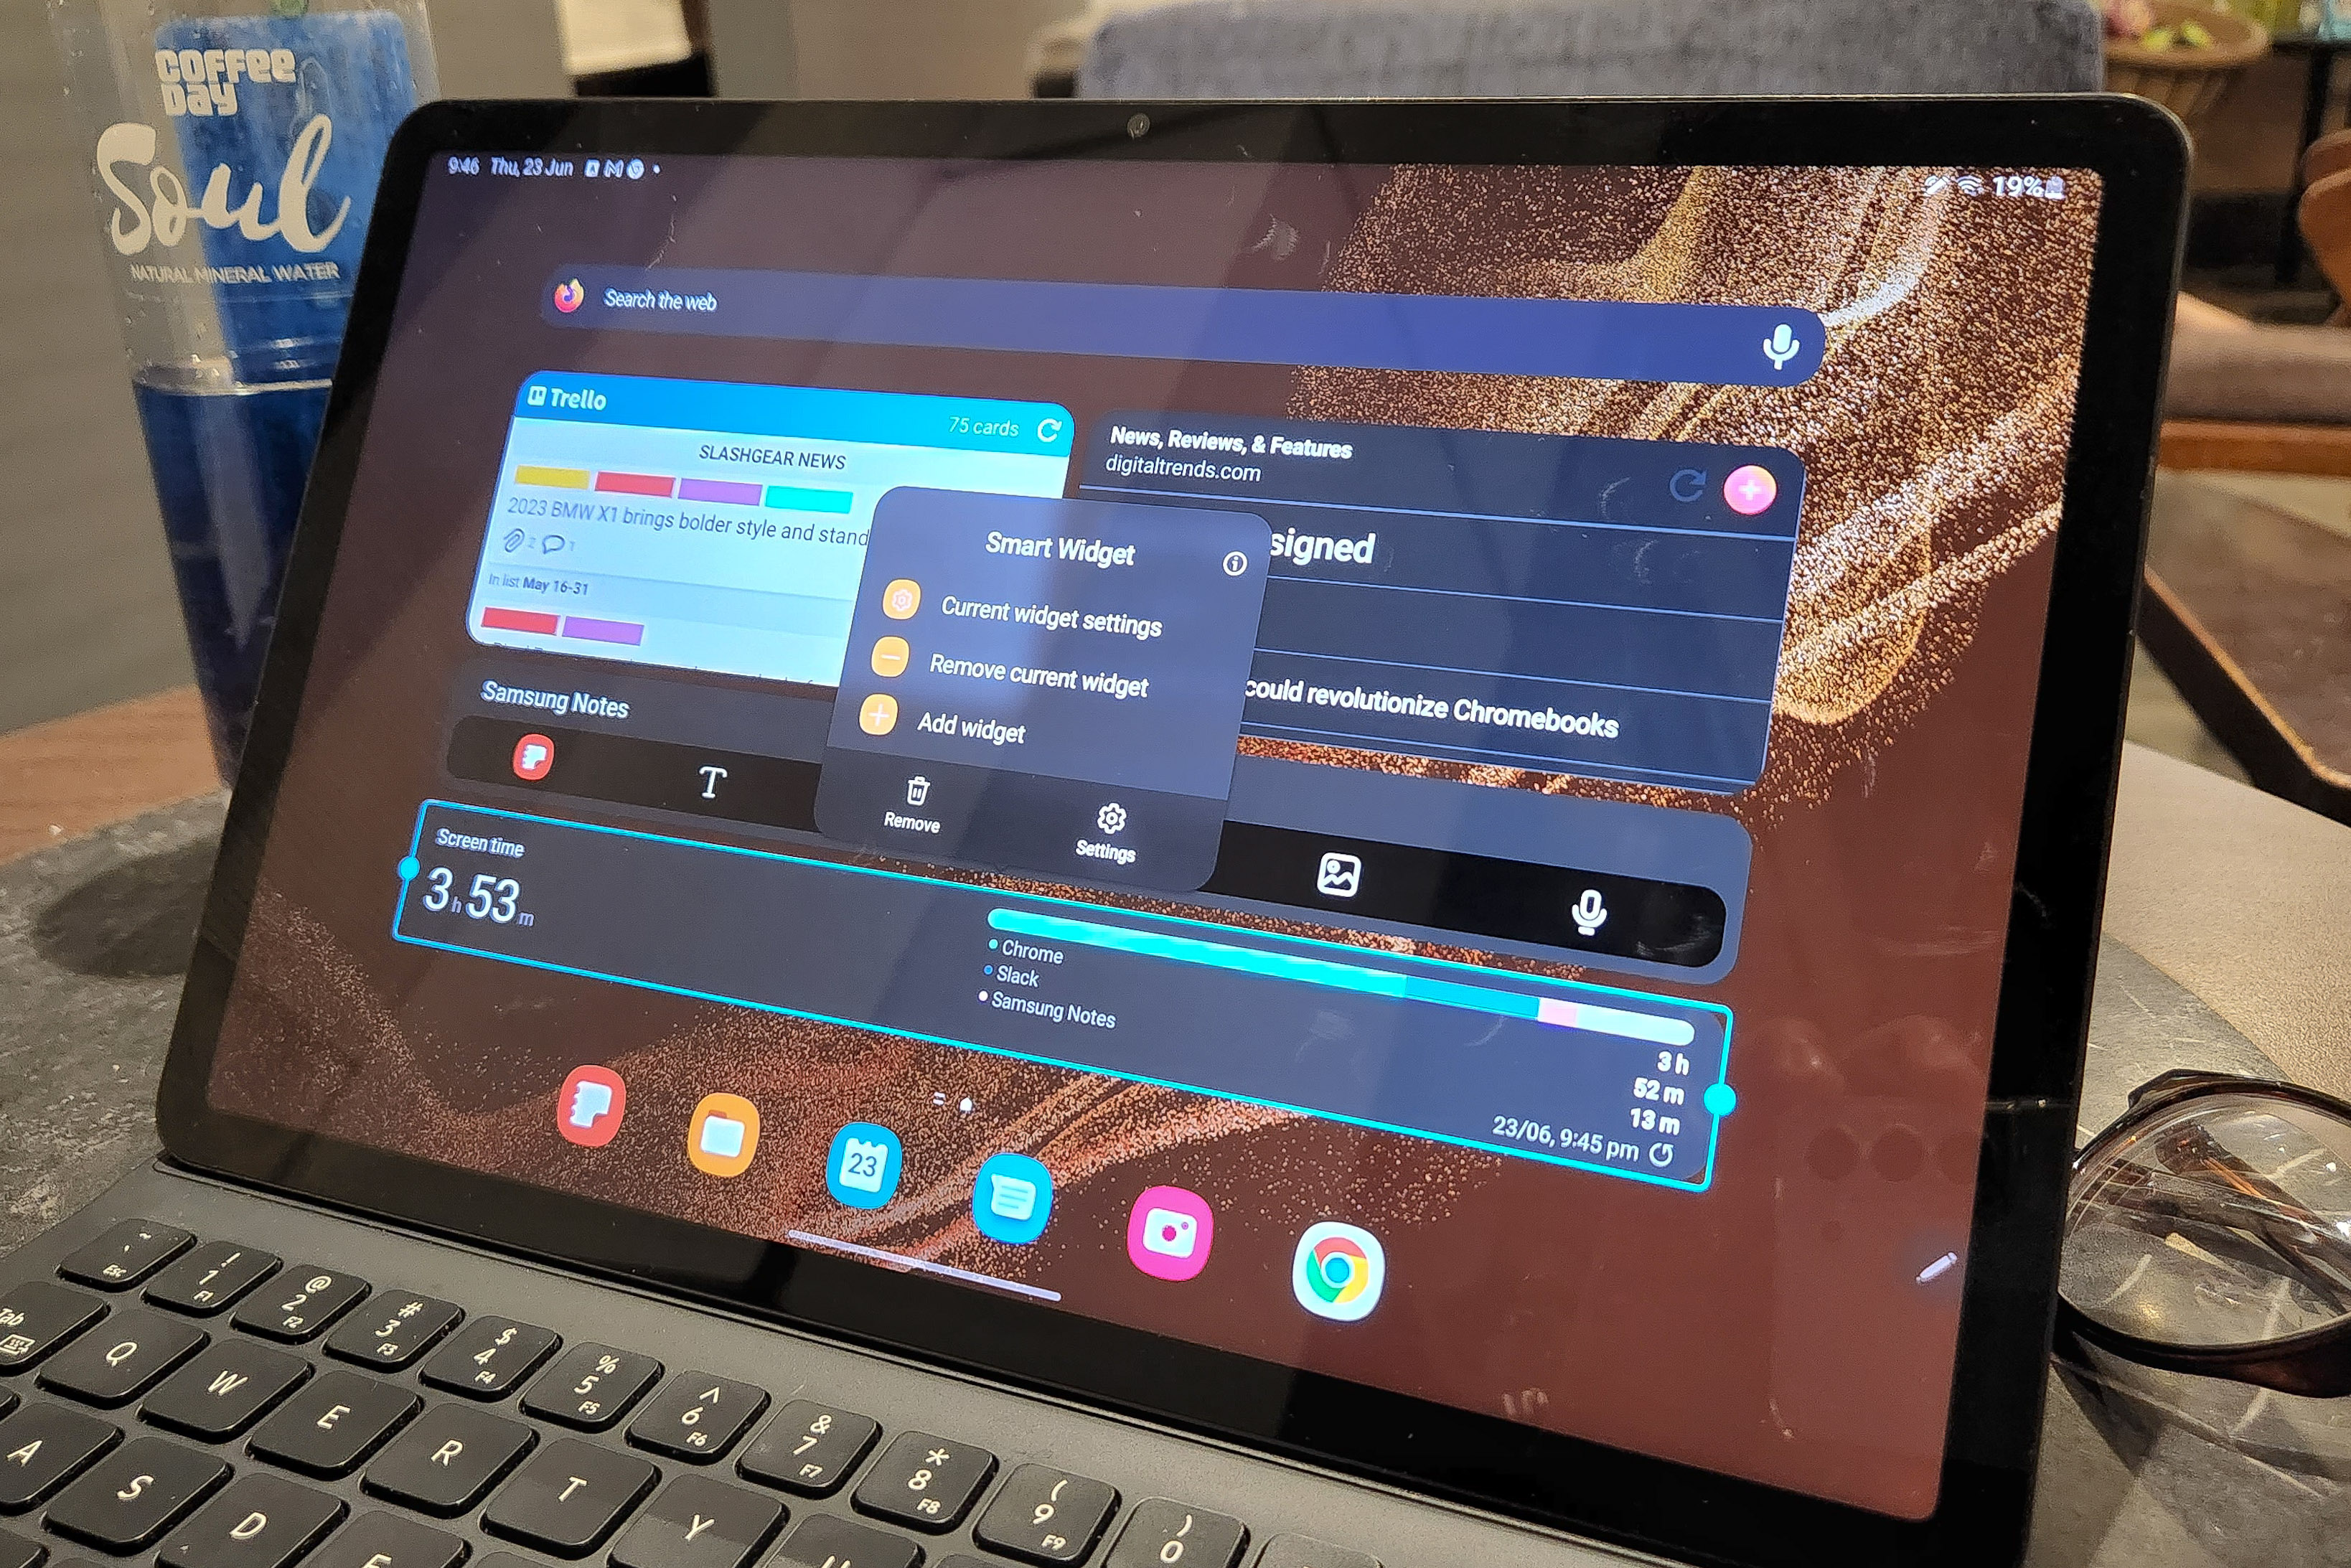 The Galaxy Tab S8 has renewed my faith in Android tablets